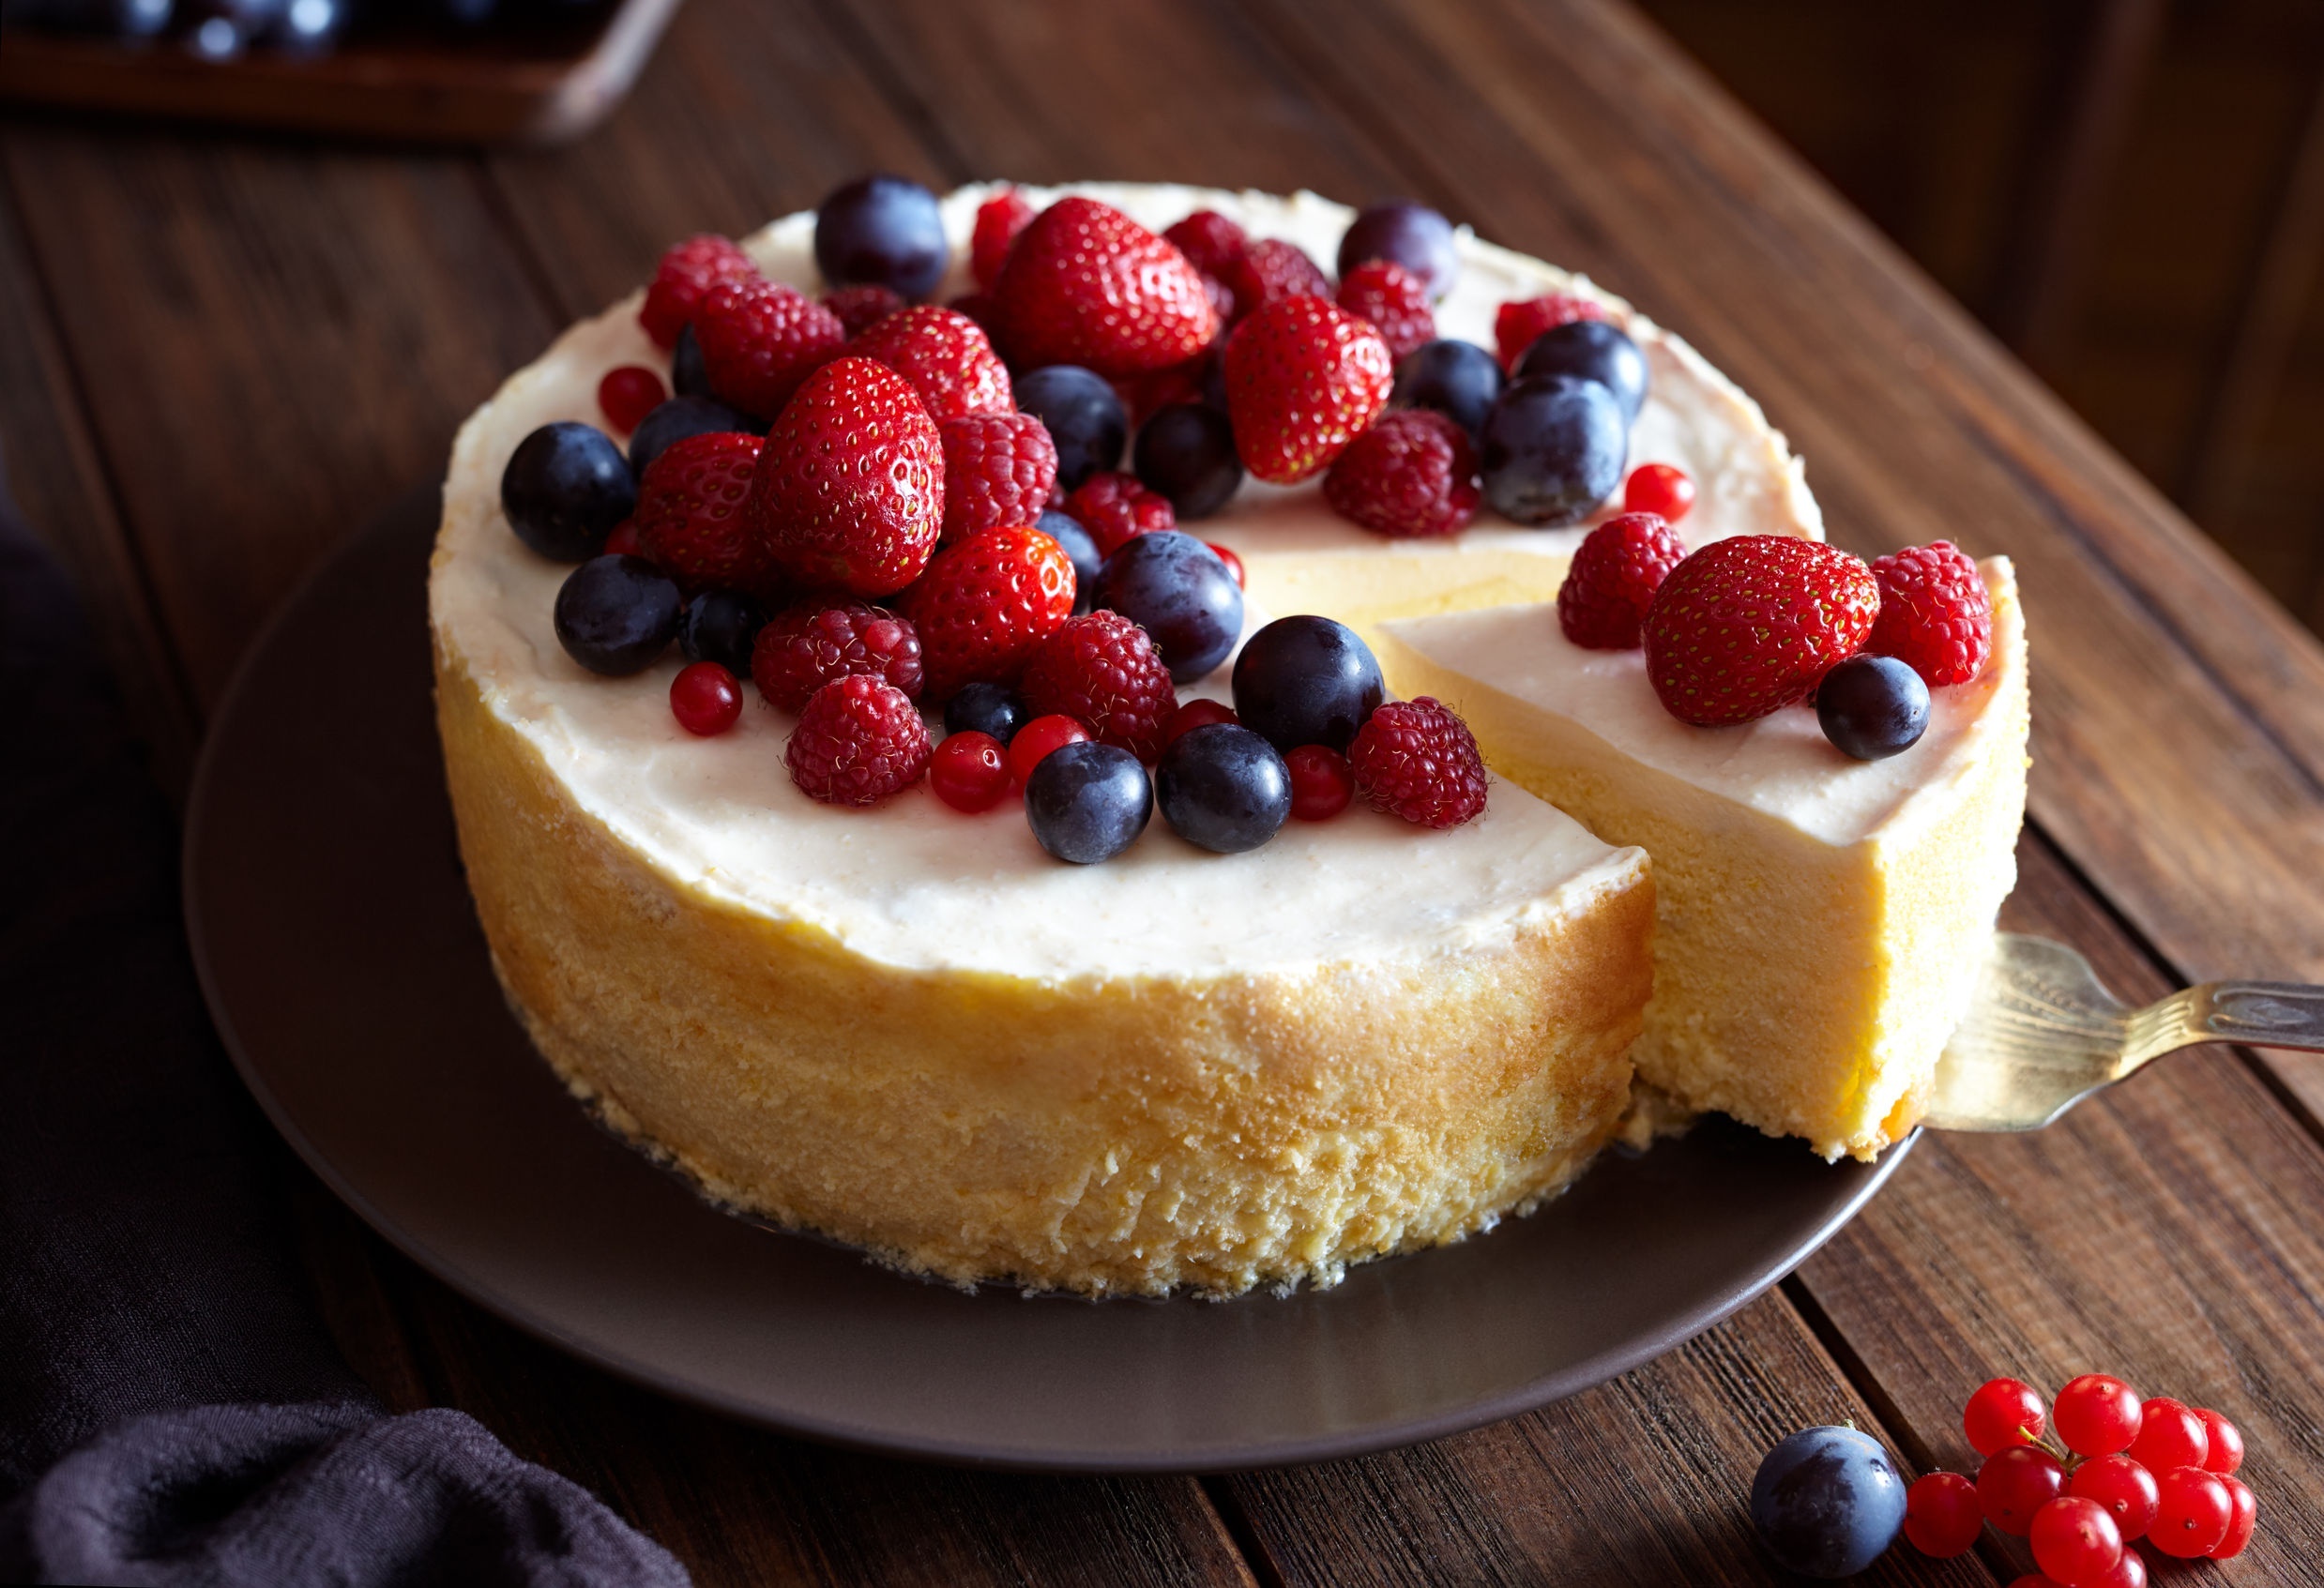 Cheesecake: Extremely rich and creamy, Sweet treat. 2480x1700 HD Wallpaper.